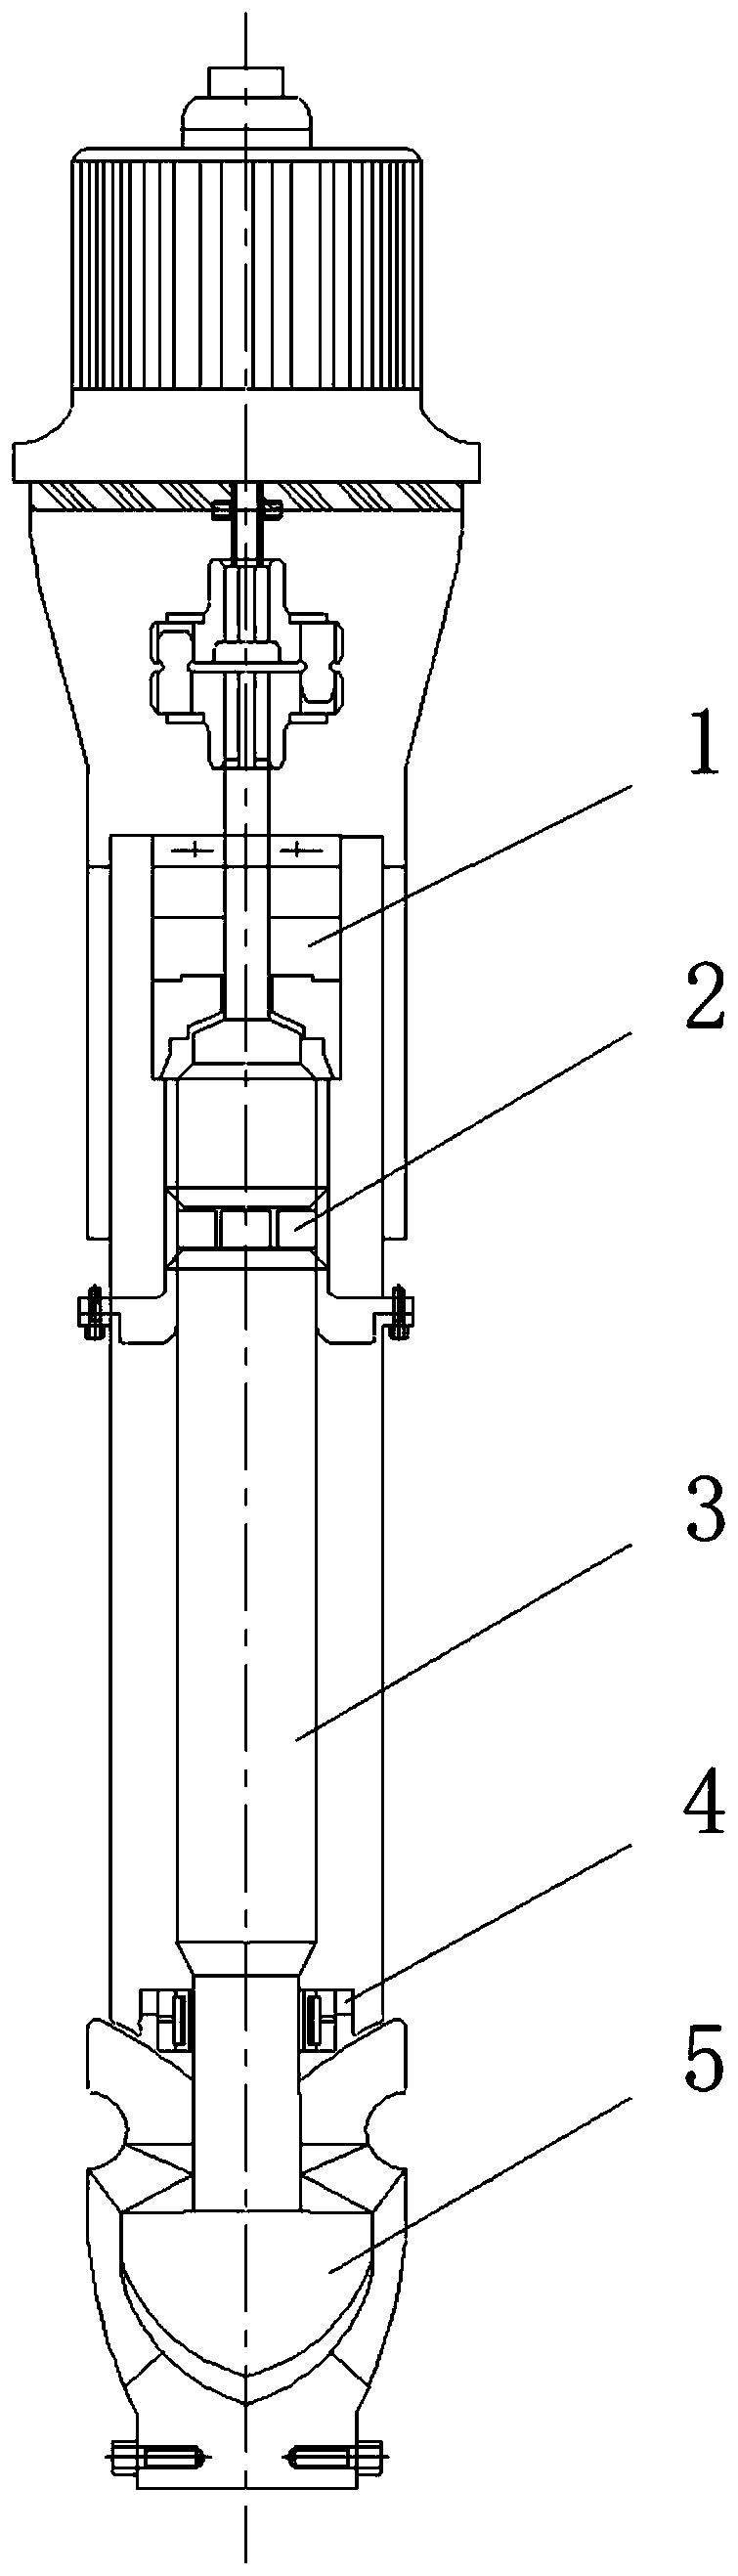 Combined non-contact double-end-face seal based on magnetic liquid sealing and fluid dynamic-pressure mechanical sealing